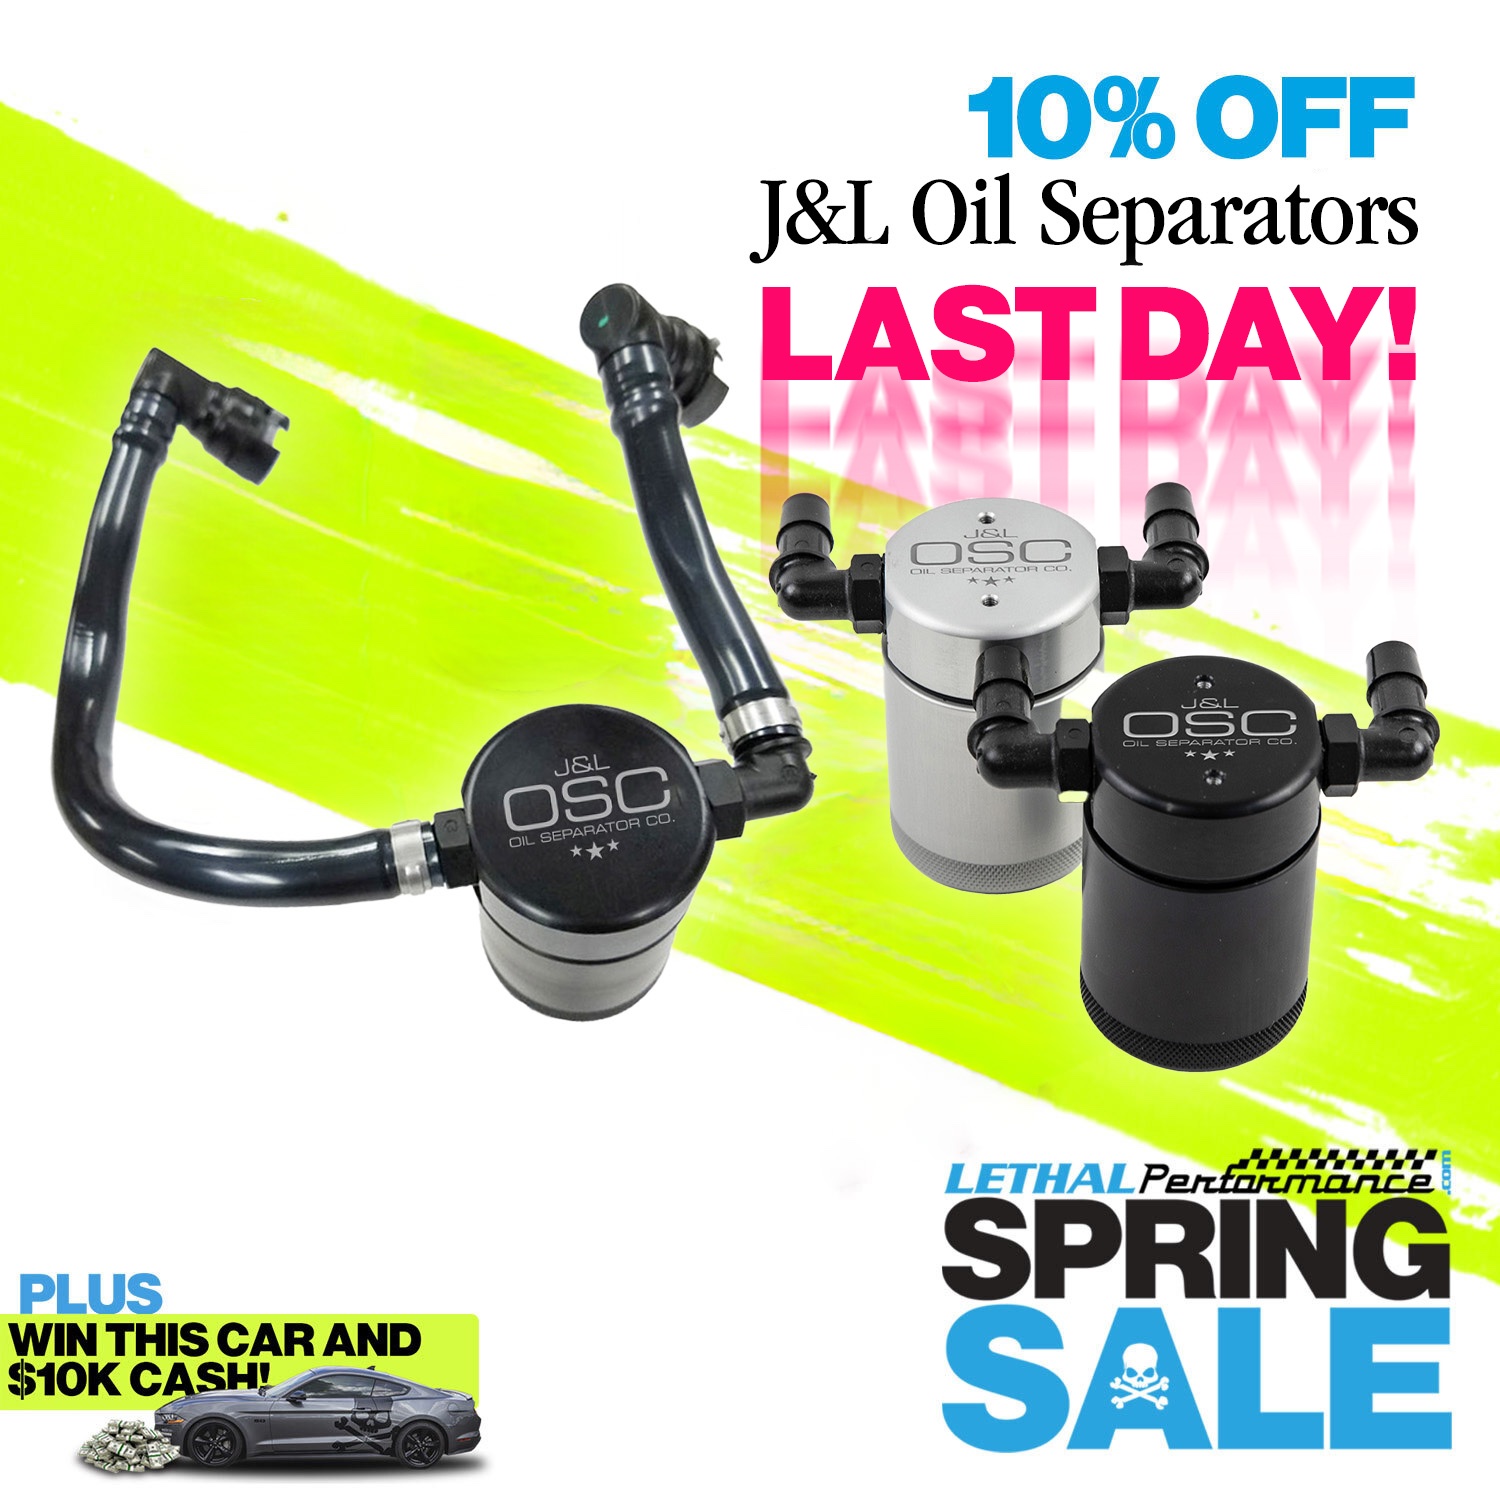 Ford Bronco Spring SALE has SPRUNG here at Lethal Performance!! jl lasst day spring sale